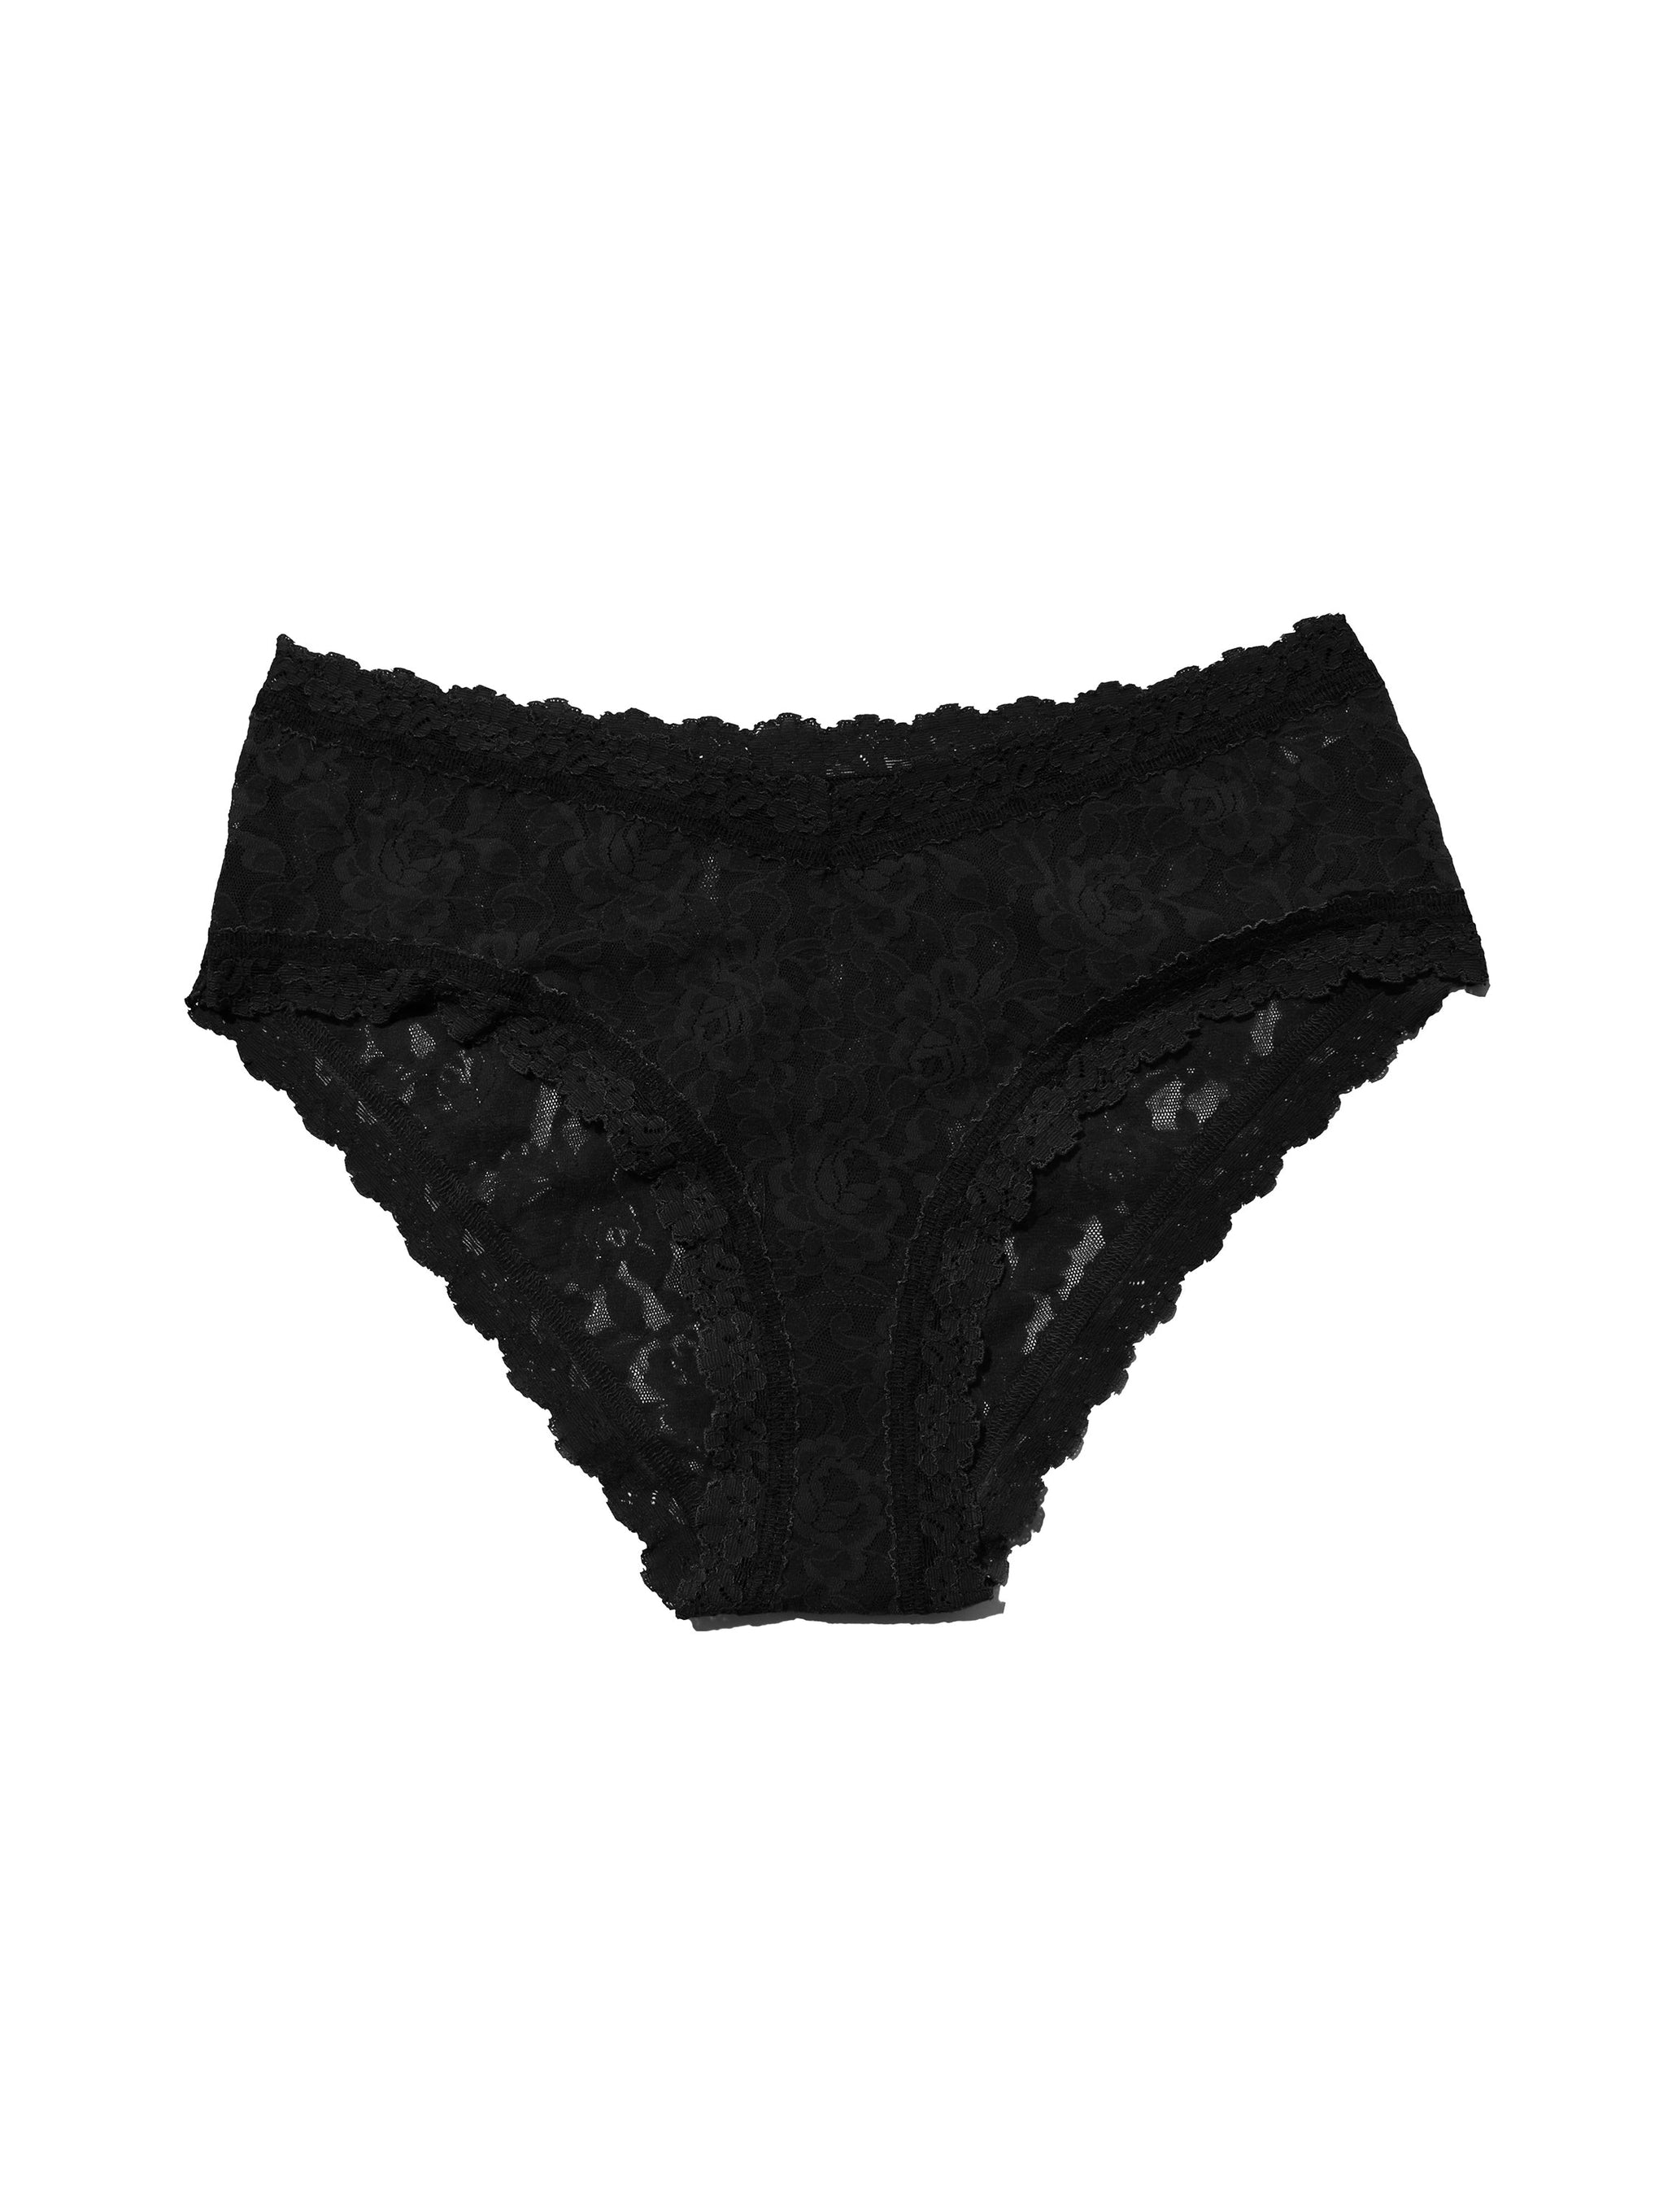 Lace Cheeky Black